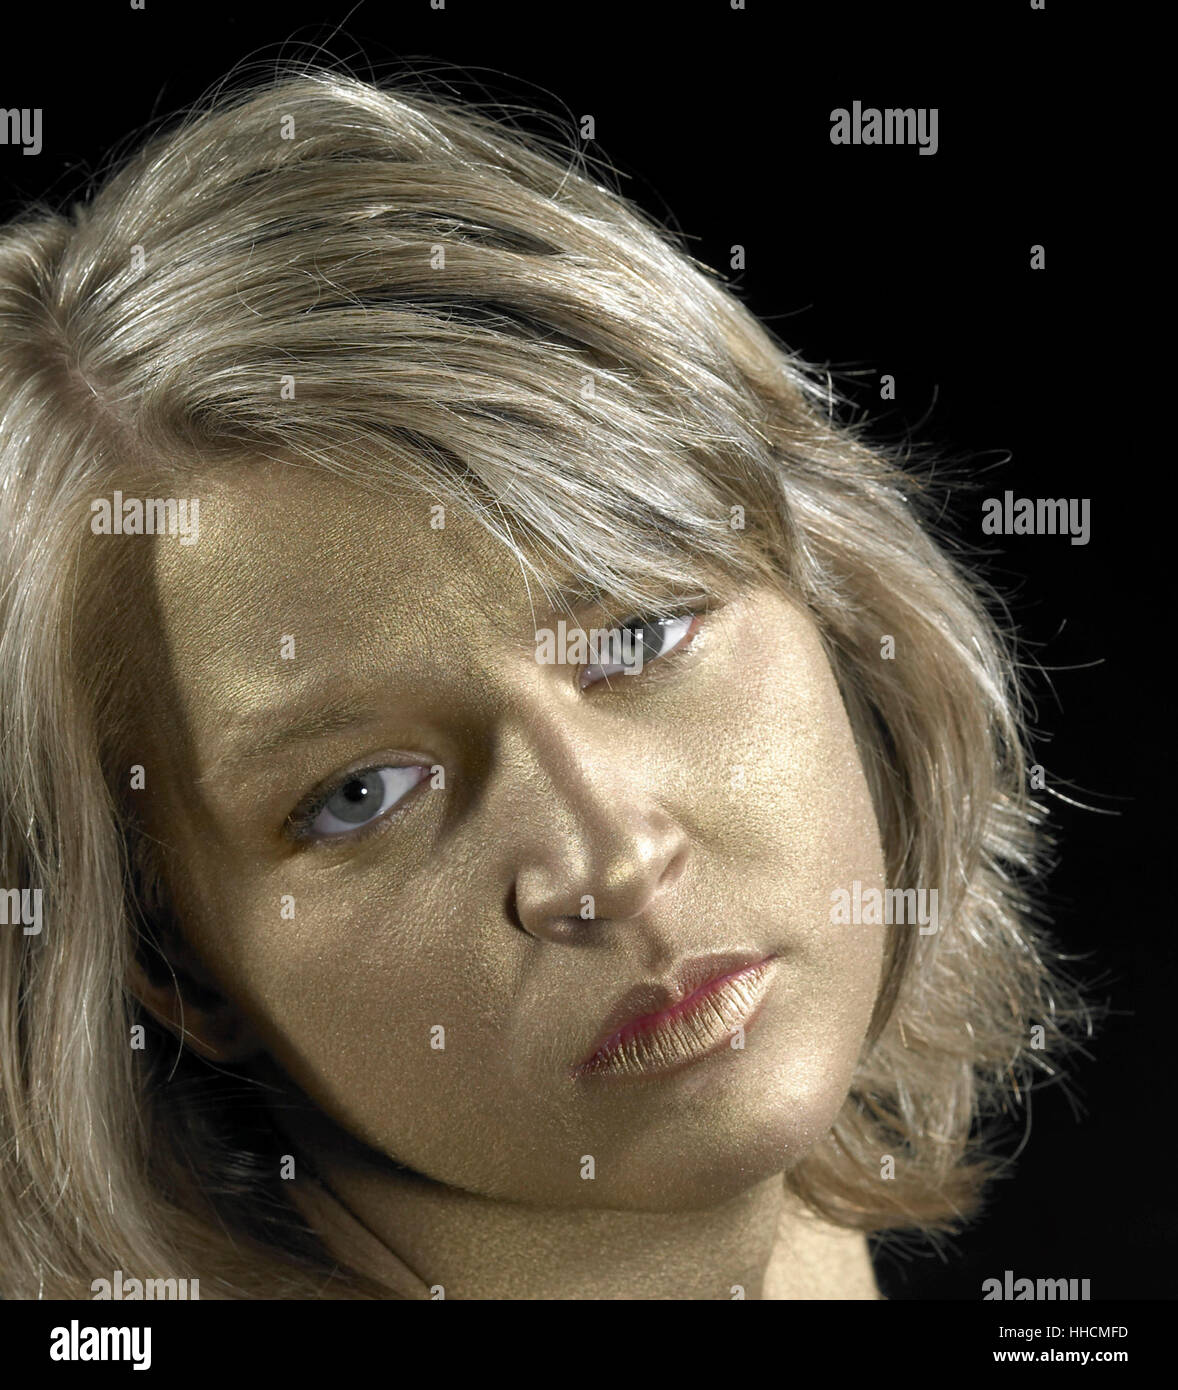 sad lookong girl with golden bodypainted face in black back Stock Photo